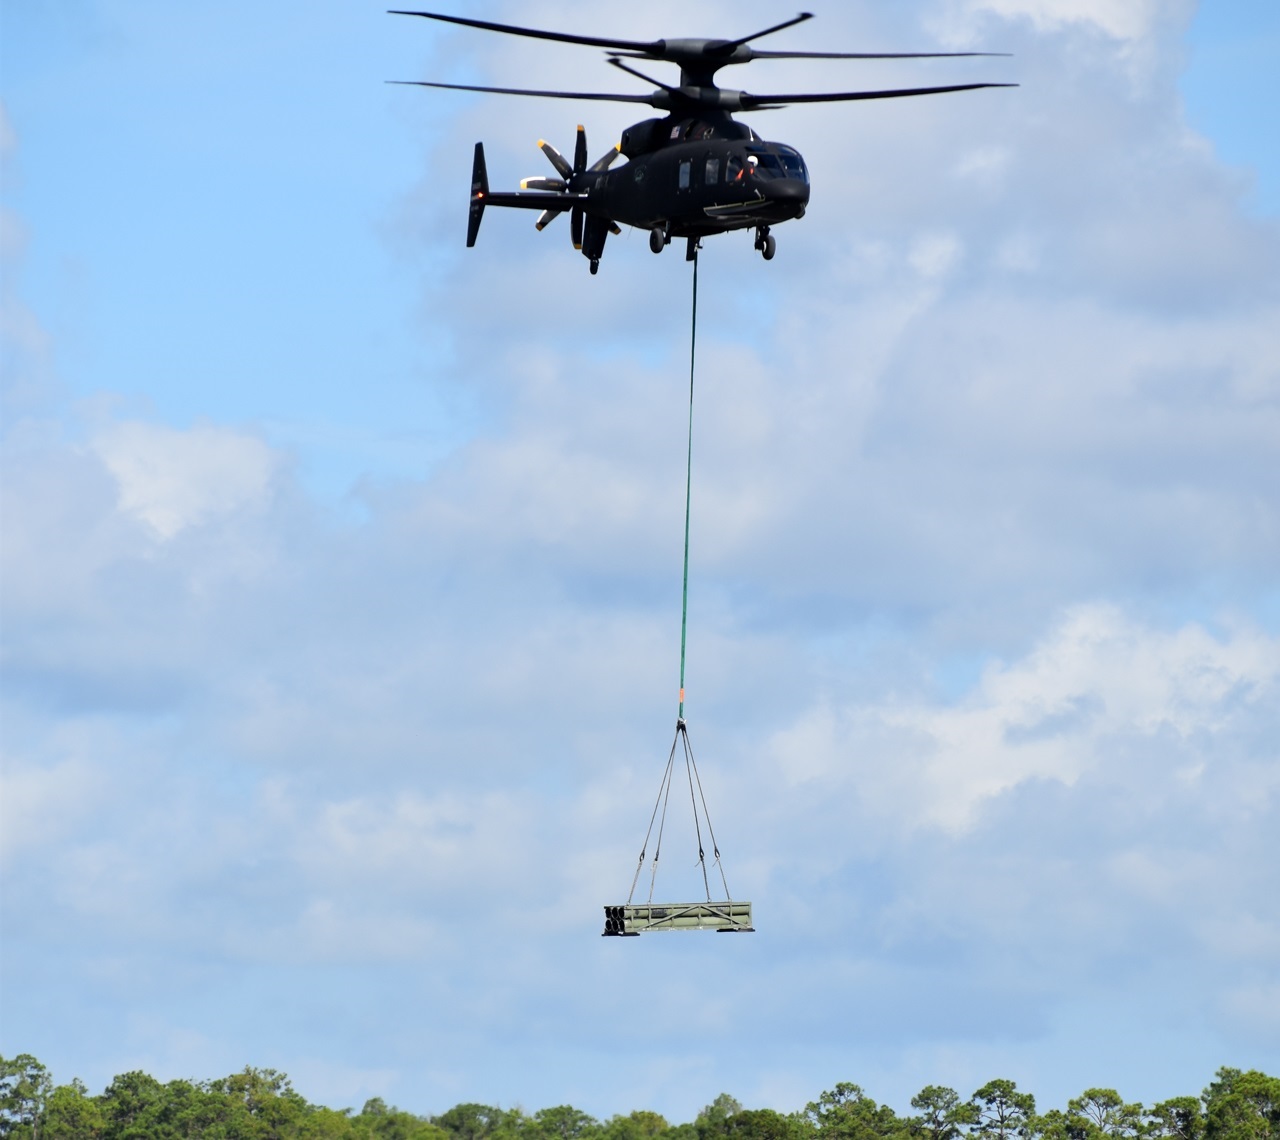  Sikorsky-Boeing SB>1 DEFIANT Helicopter Flexes Its Muscle-lifting 5,300 Pounds